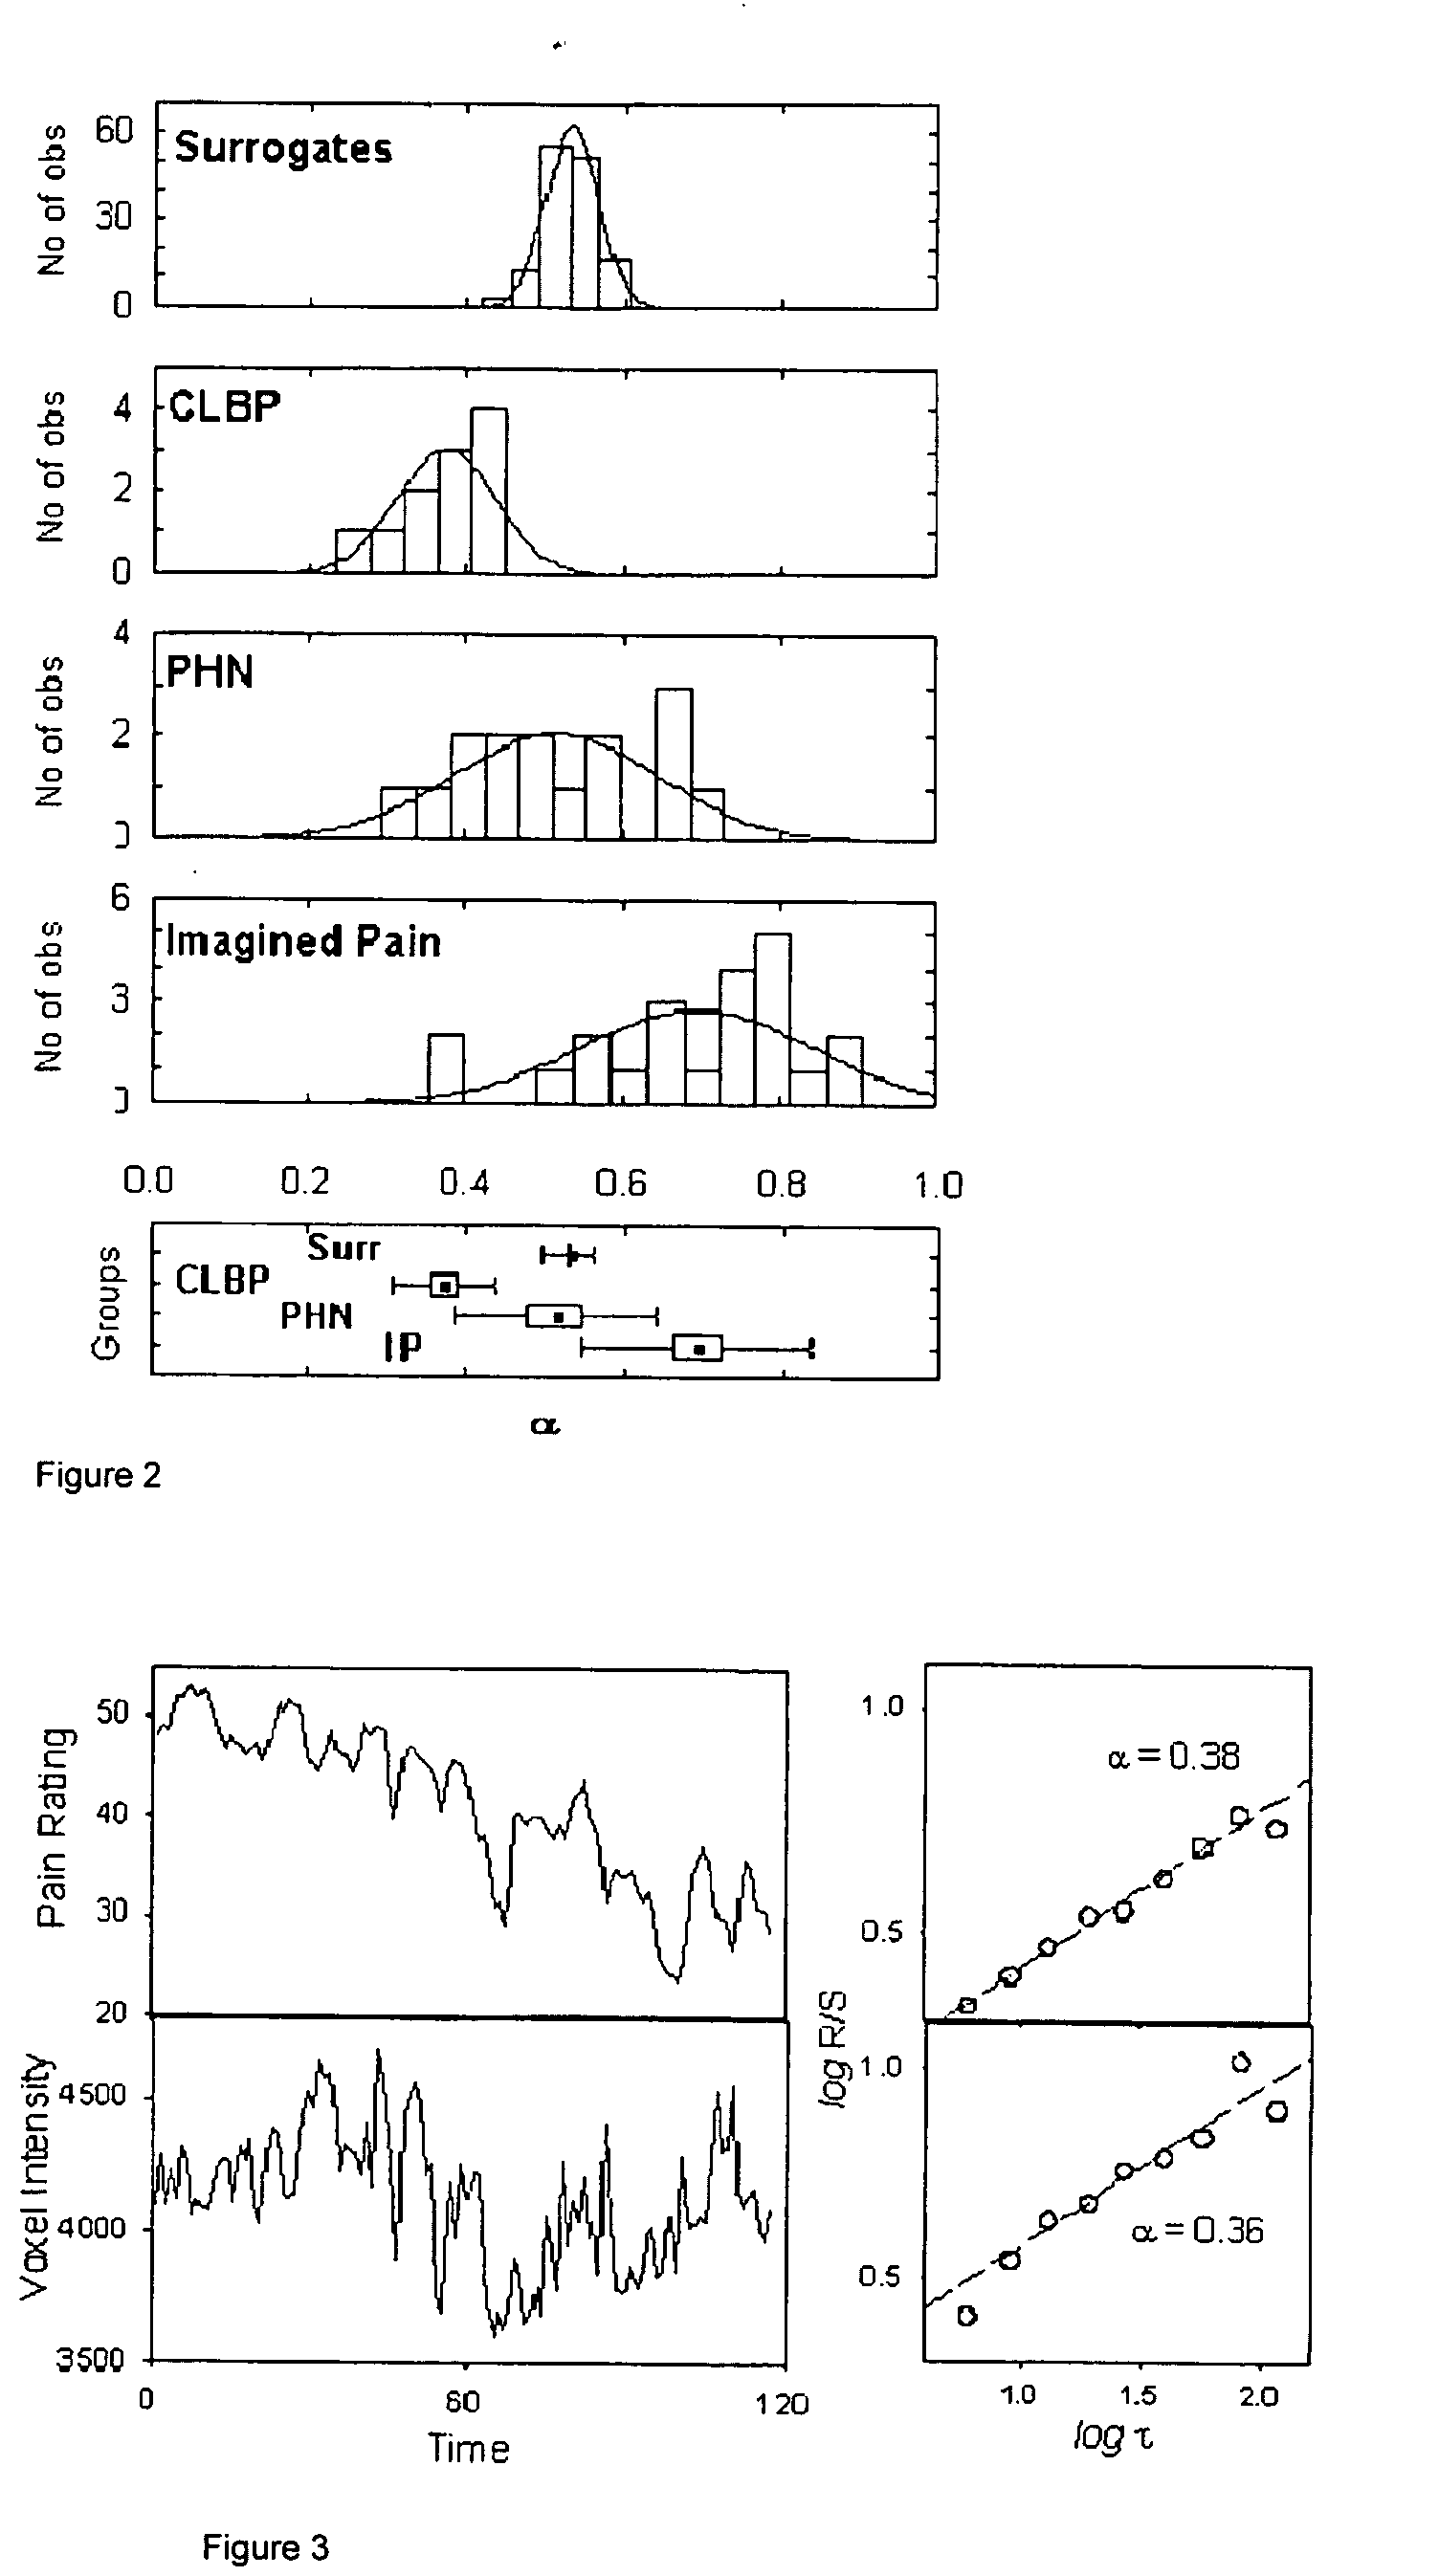 Apparatus and method for pain measurement